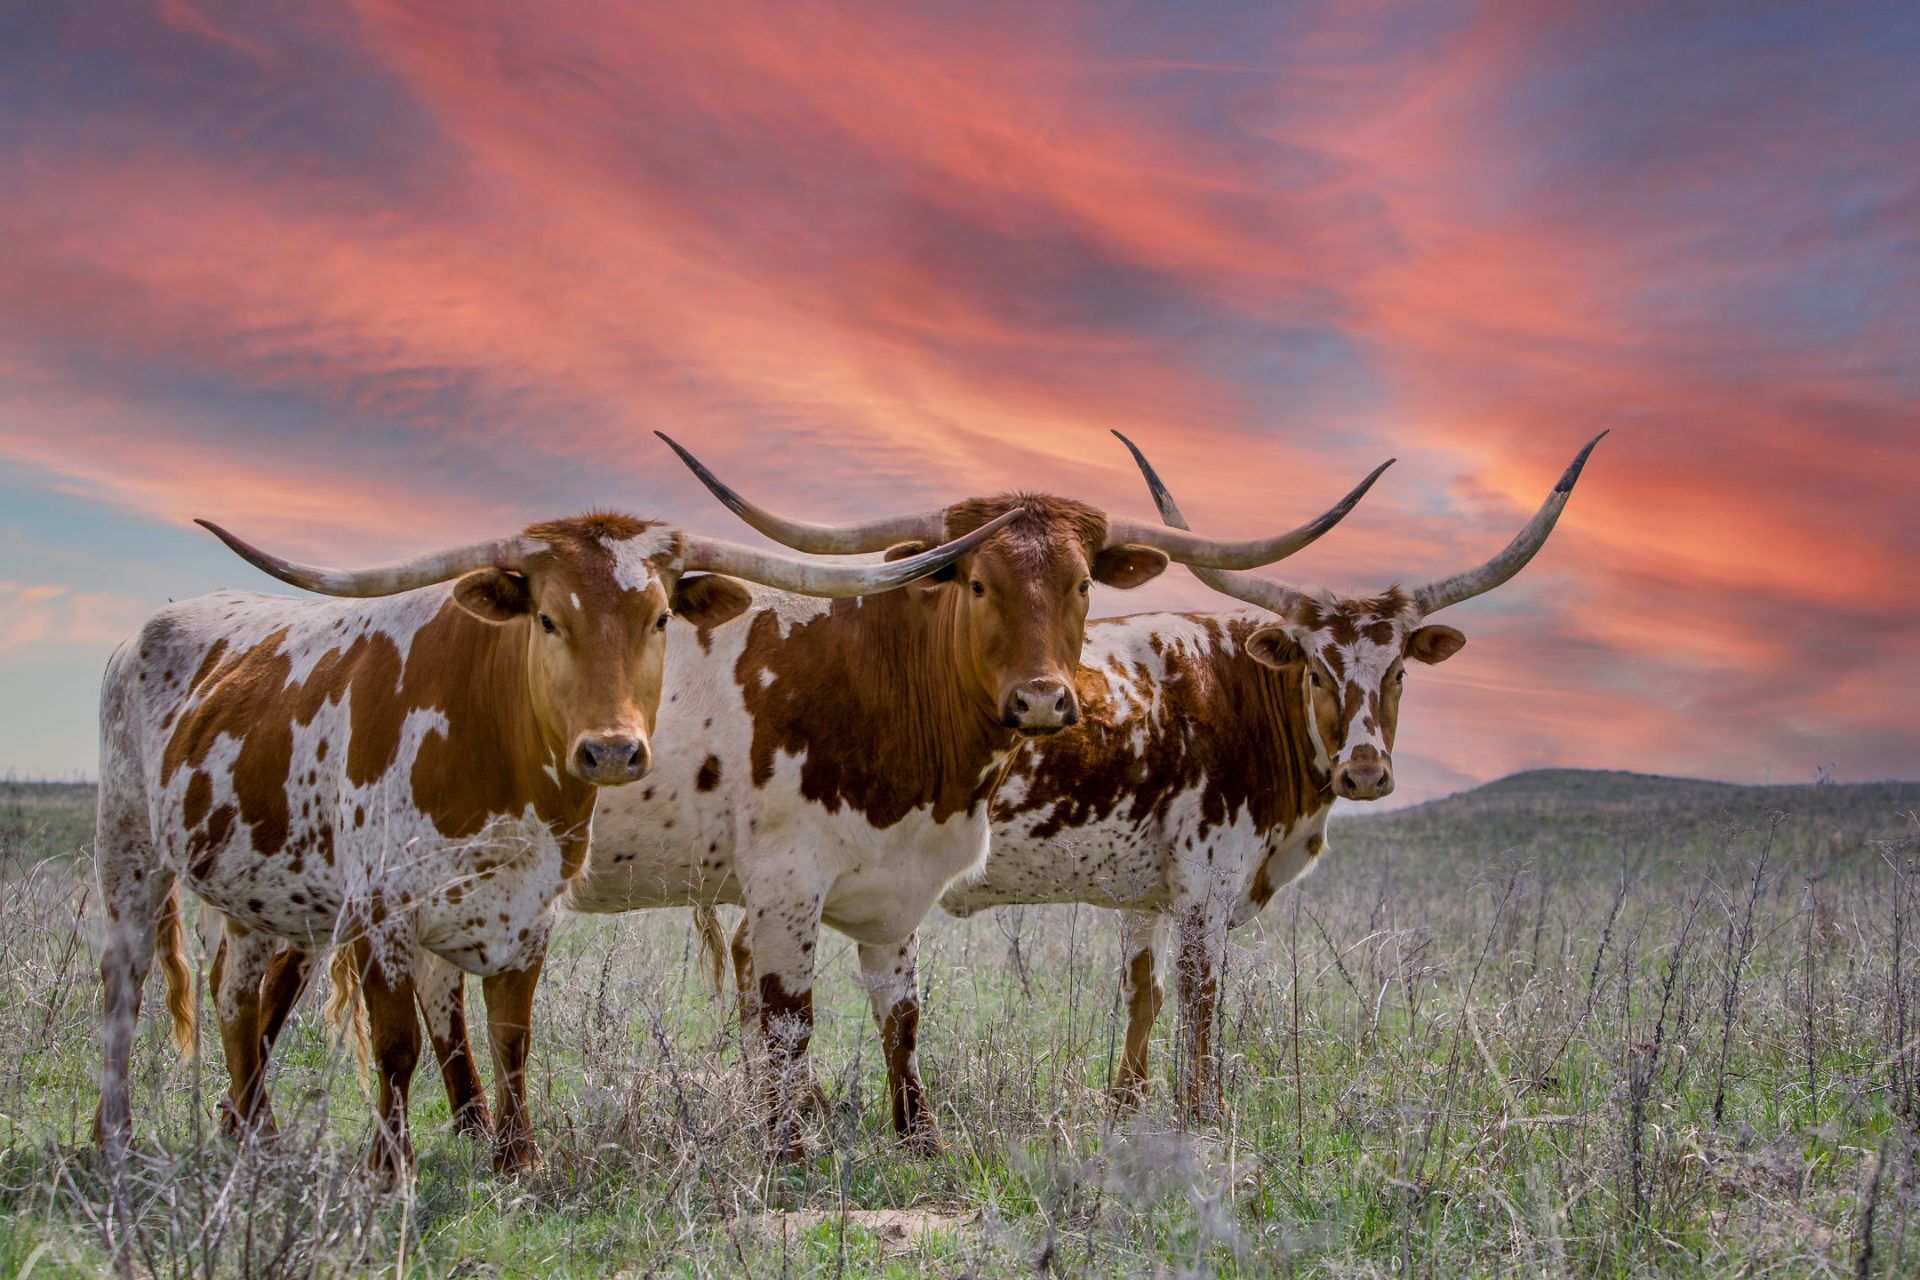 Three longhorns standing in a field at sunset. - Longhorn